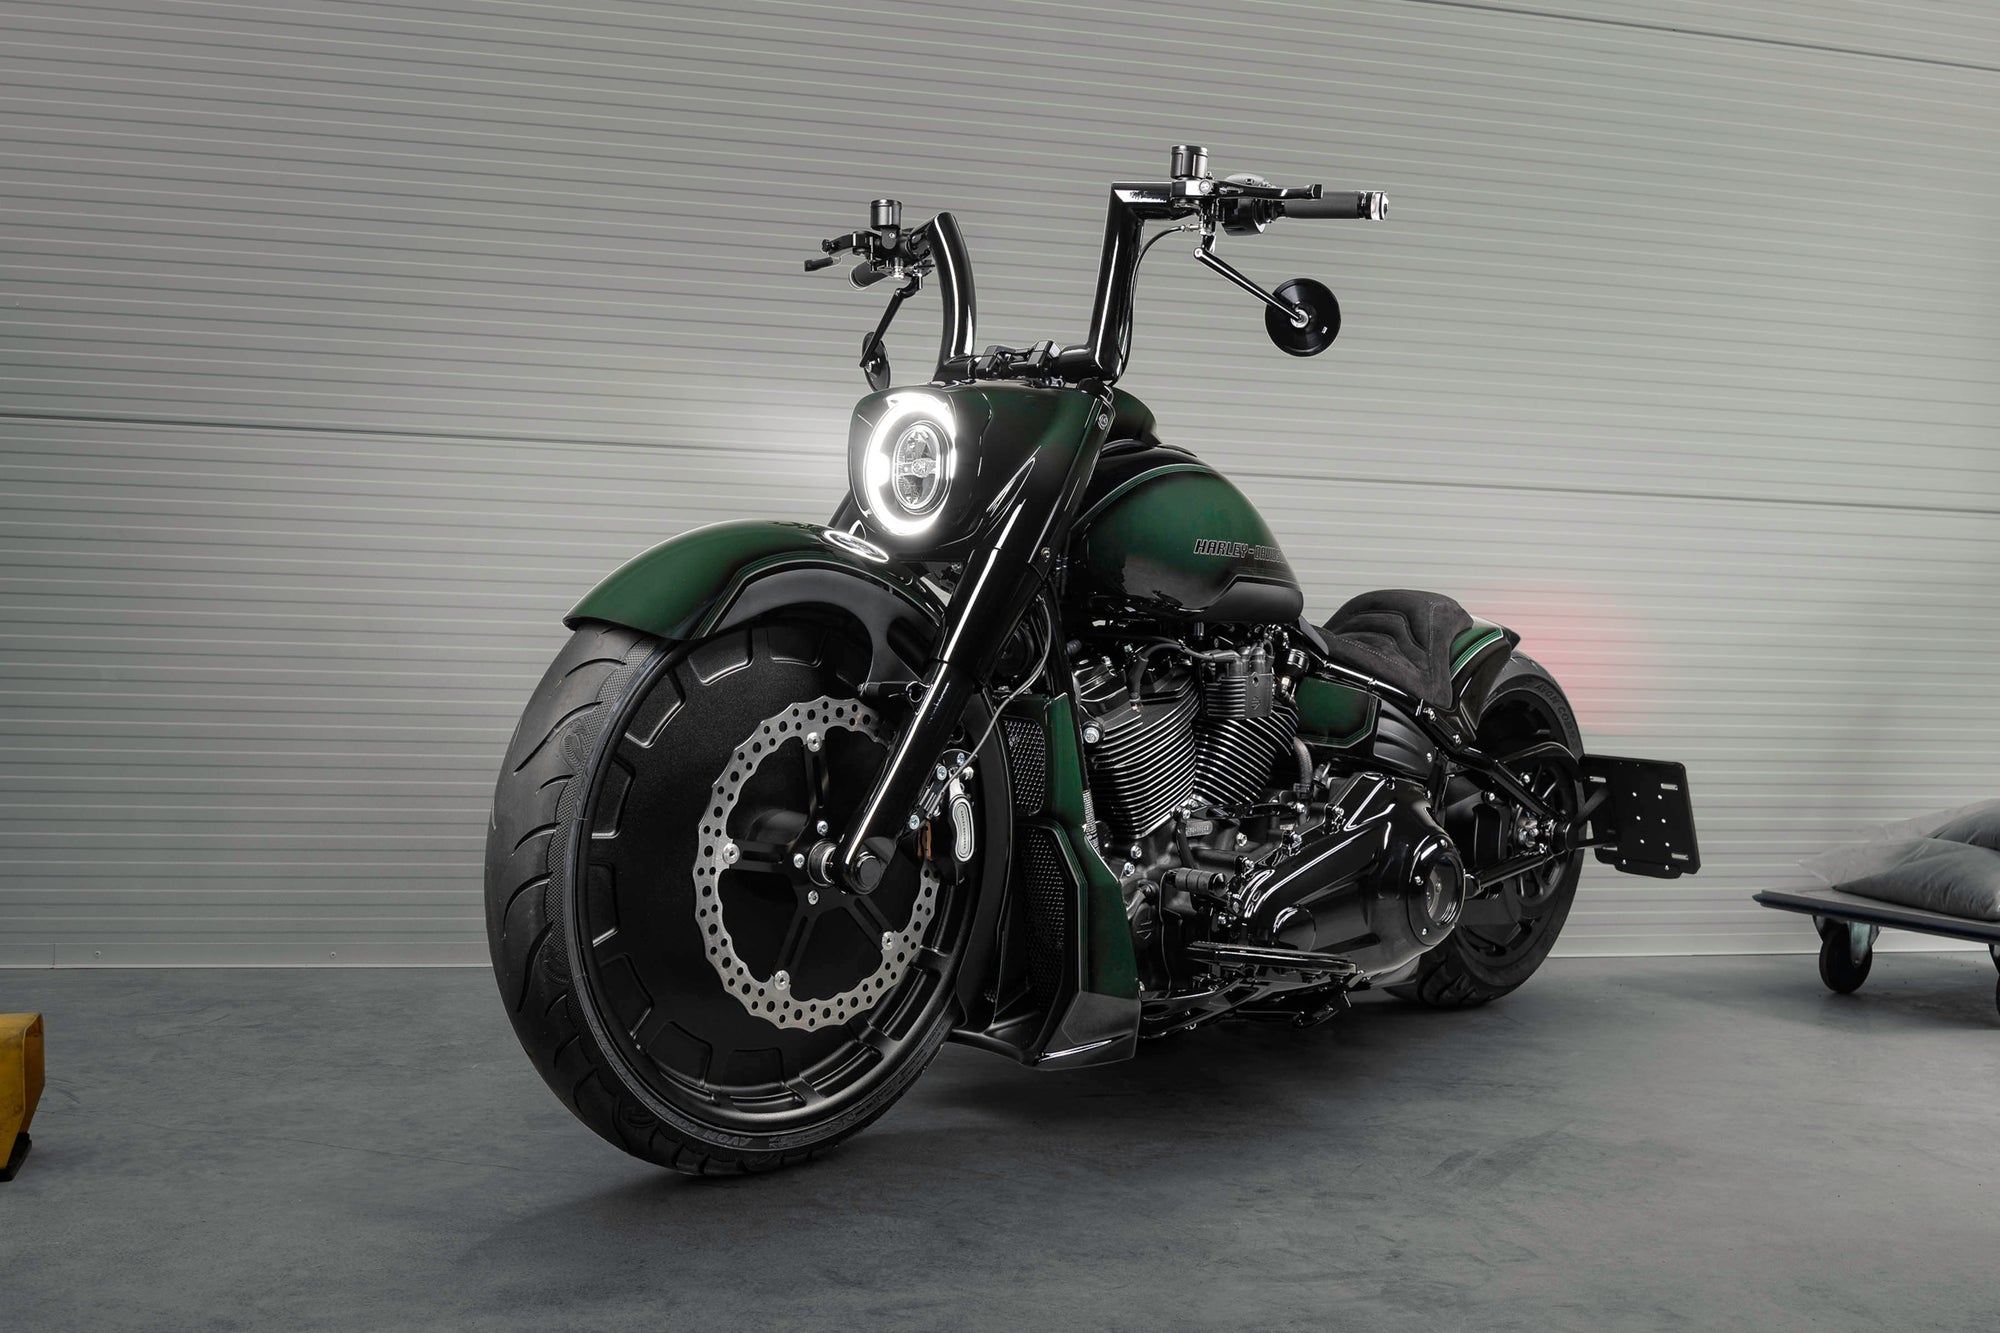 Modified Harley Davidson Fat Boy motorcycle with Killer Custom parts from the side in a spacious and modern garage